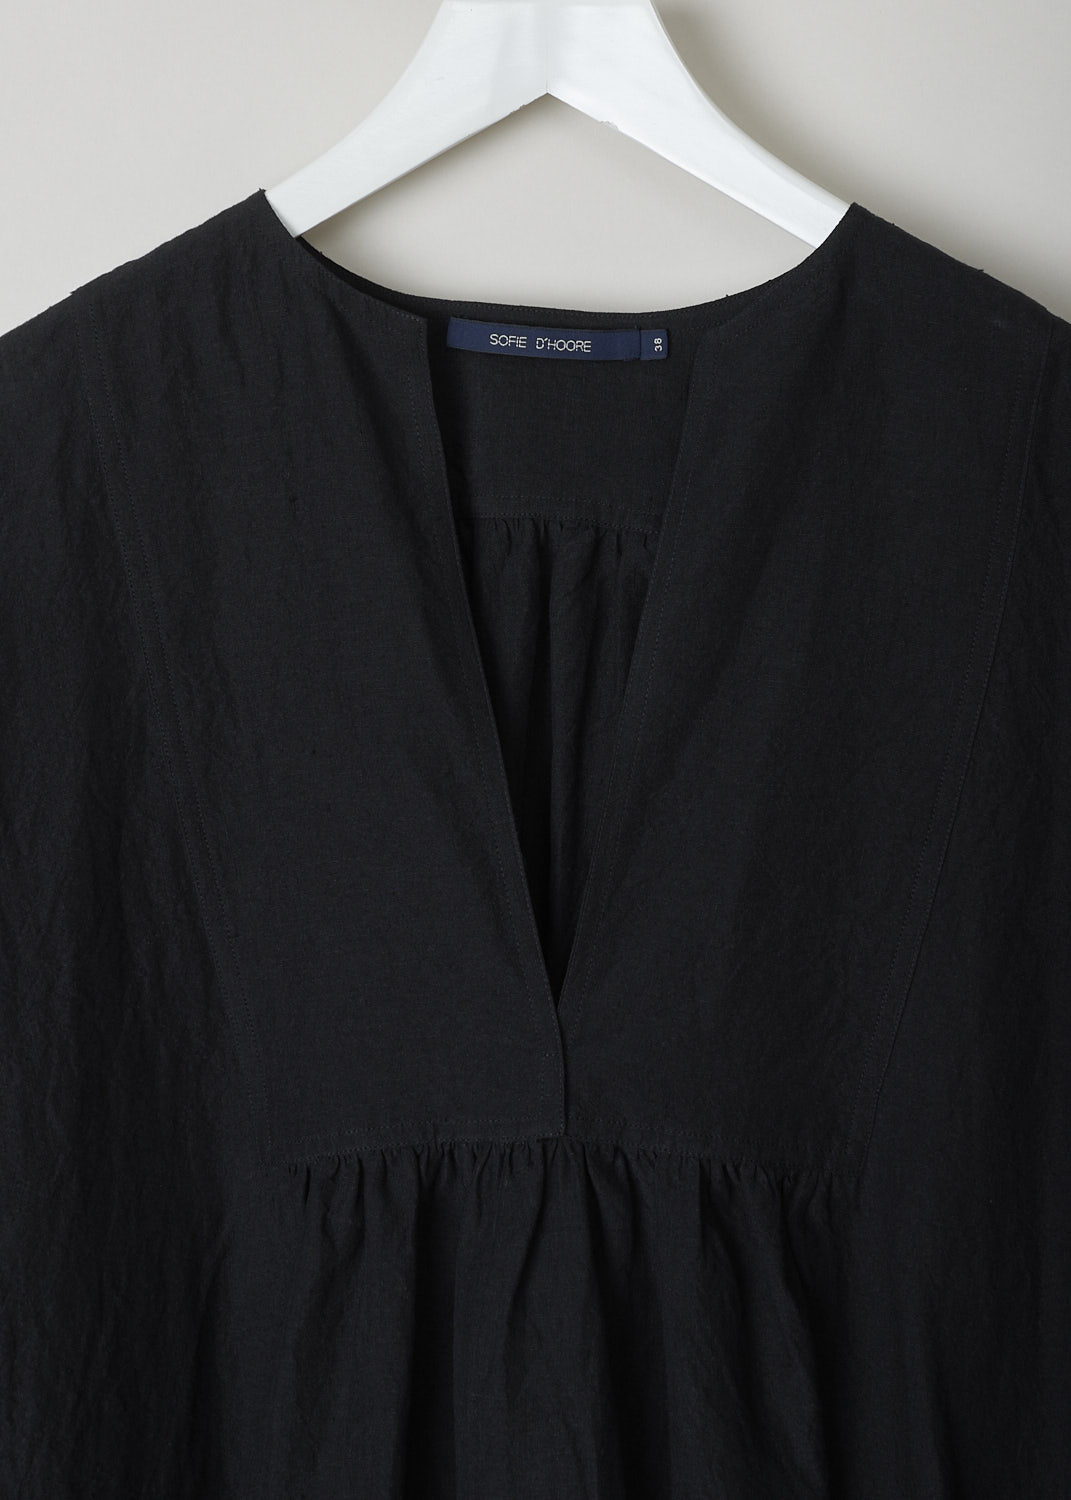 SOFIE D’HOORE, BLACK LINEN DELIZA DRESS, DELIZA_LIFE_BLACK, Black, Detail,This black linen dress has a round neckline that goes into a deep V cutout. Subtle ruching can be found beneath the V. This long sleeve midi dress has a straight hemline with an asymmetrical finish, meaning the back is a little longer than the front. The dress has concealed slanted pockets and slits can be found on either side. The dress has a wide silhouette. 
